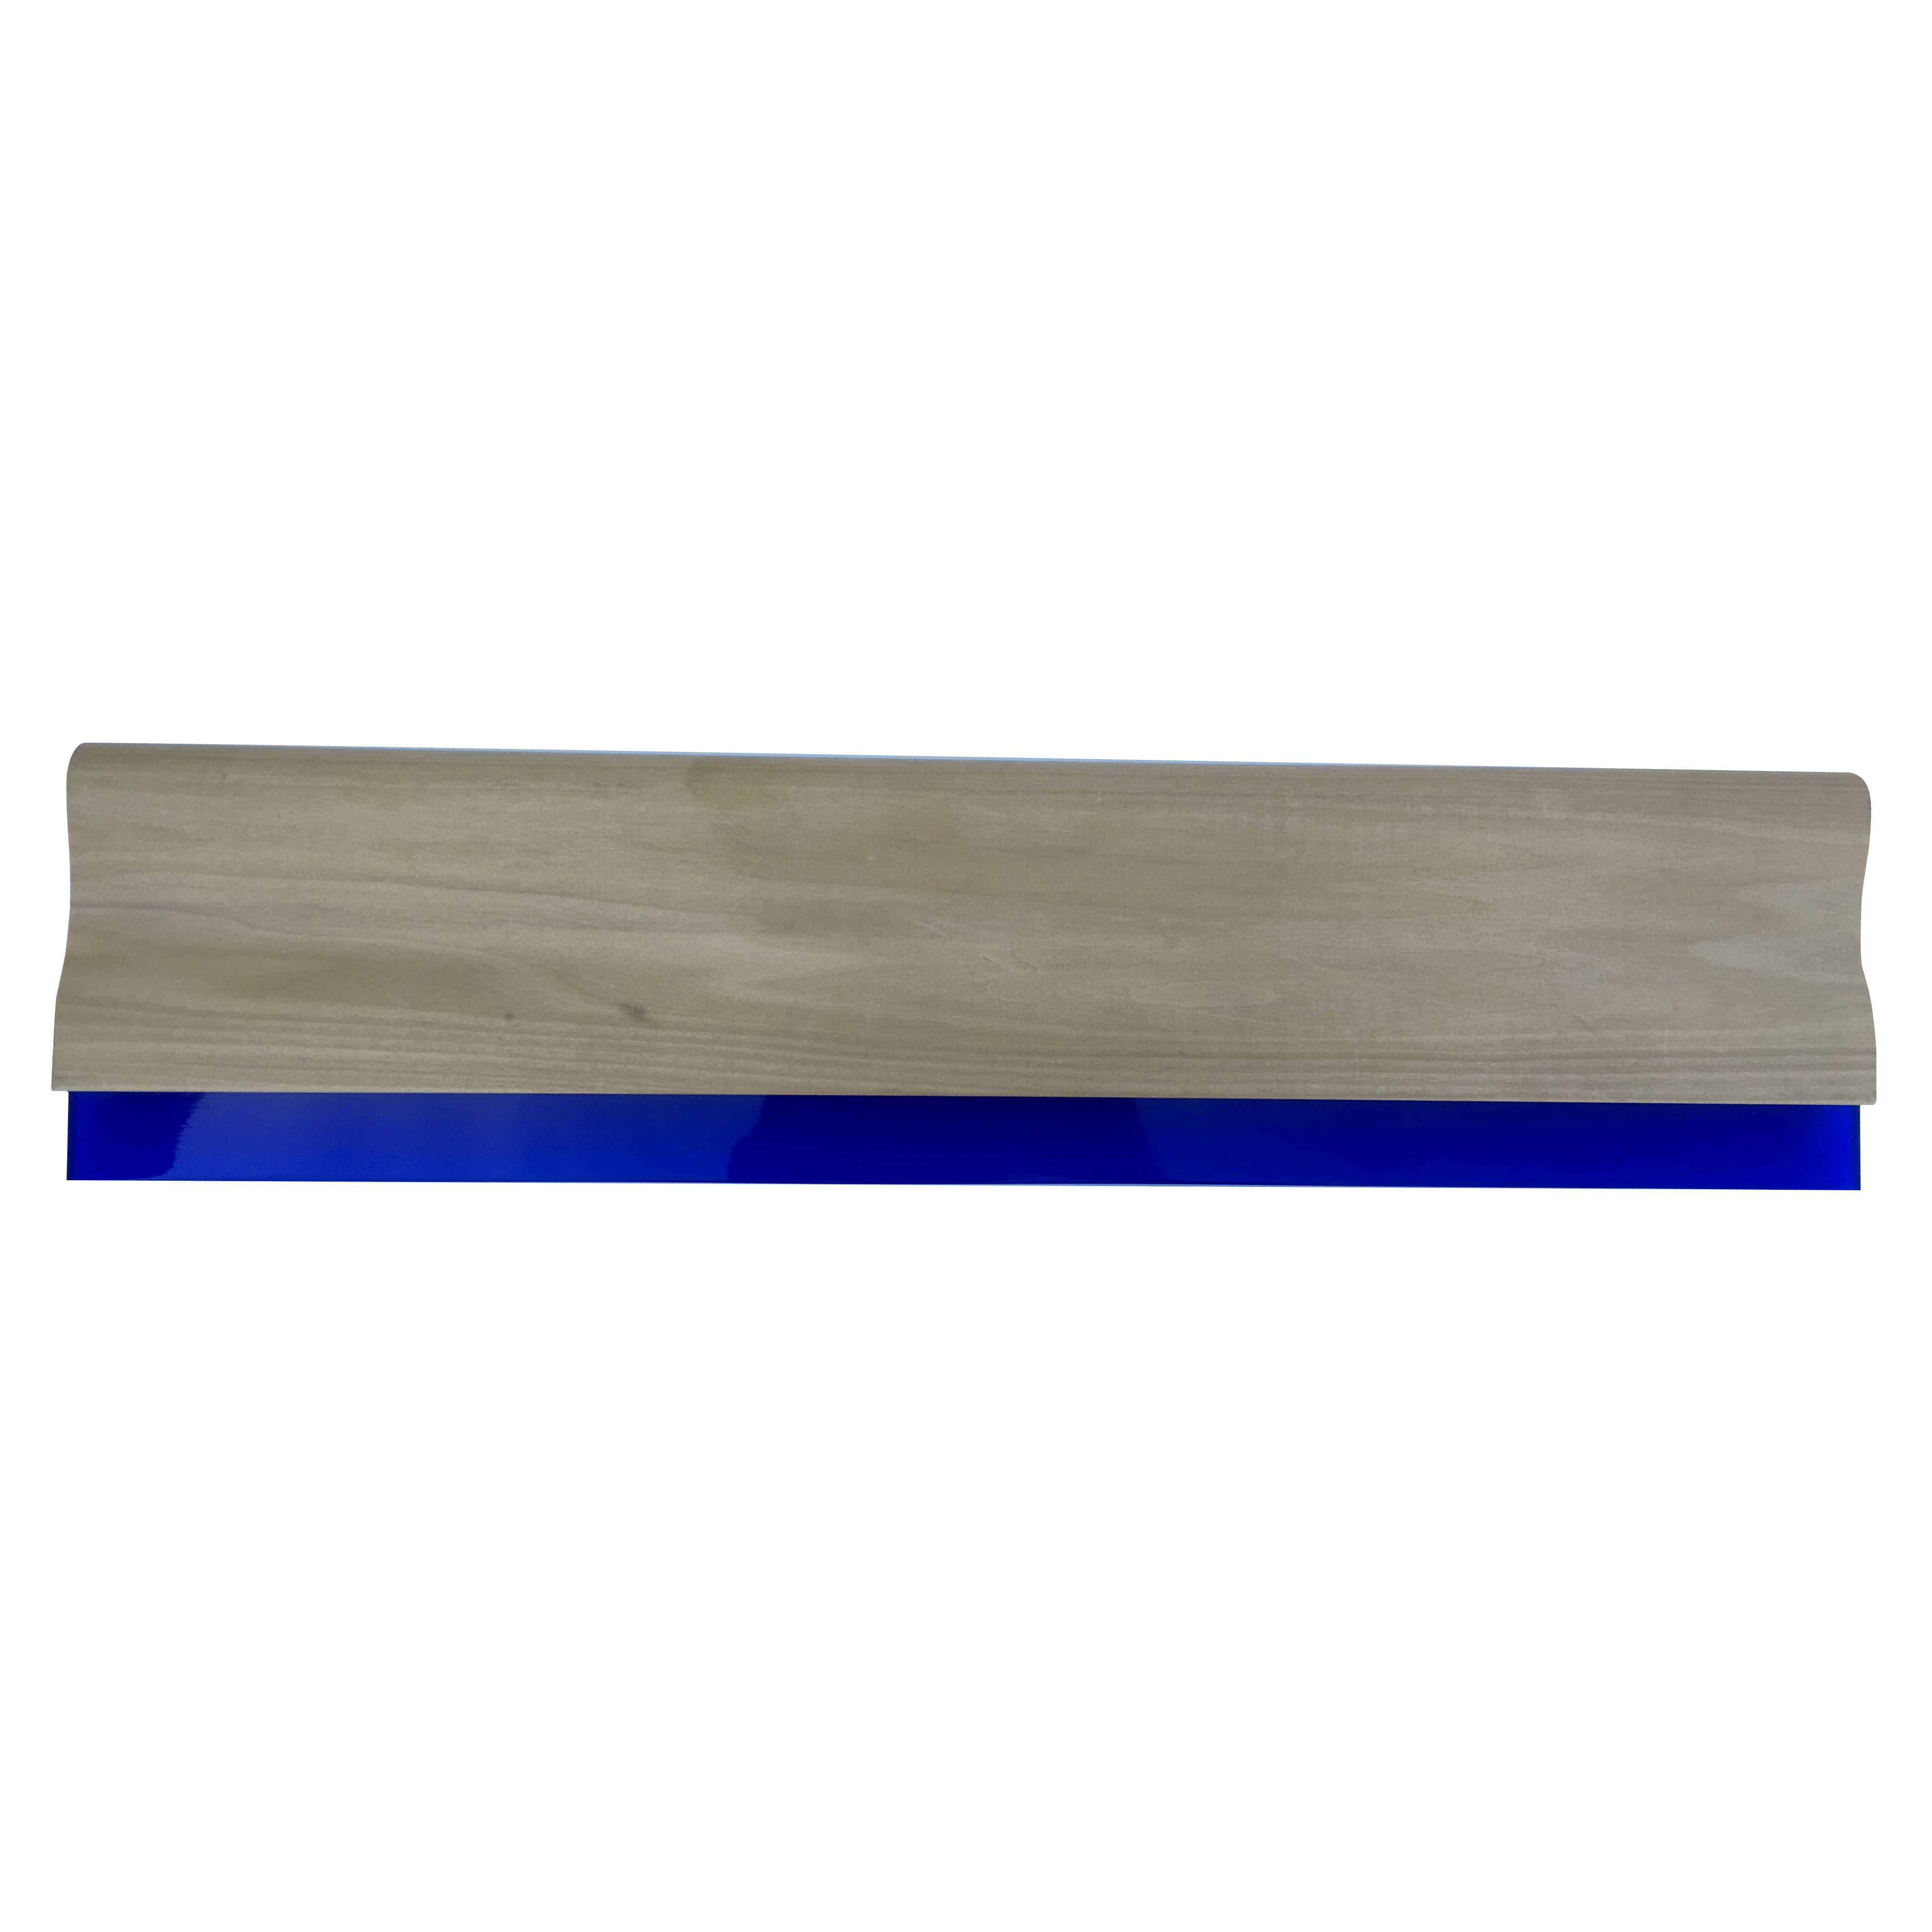 Squeegee - Wood Handle Assembled - Per Inch